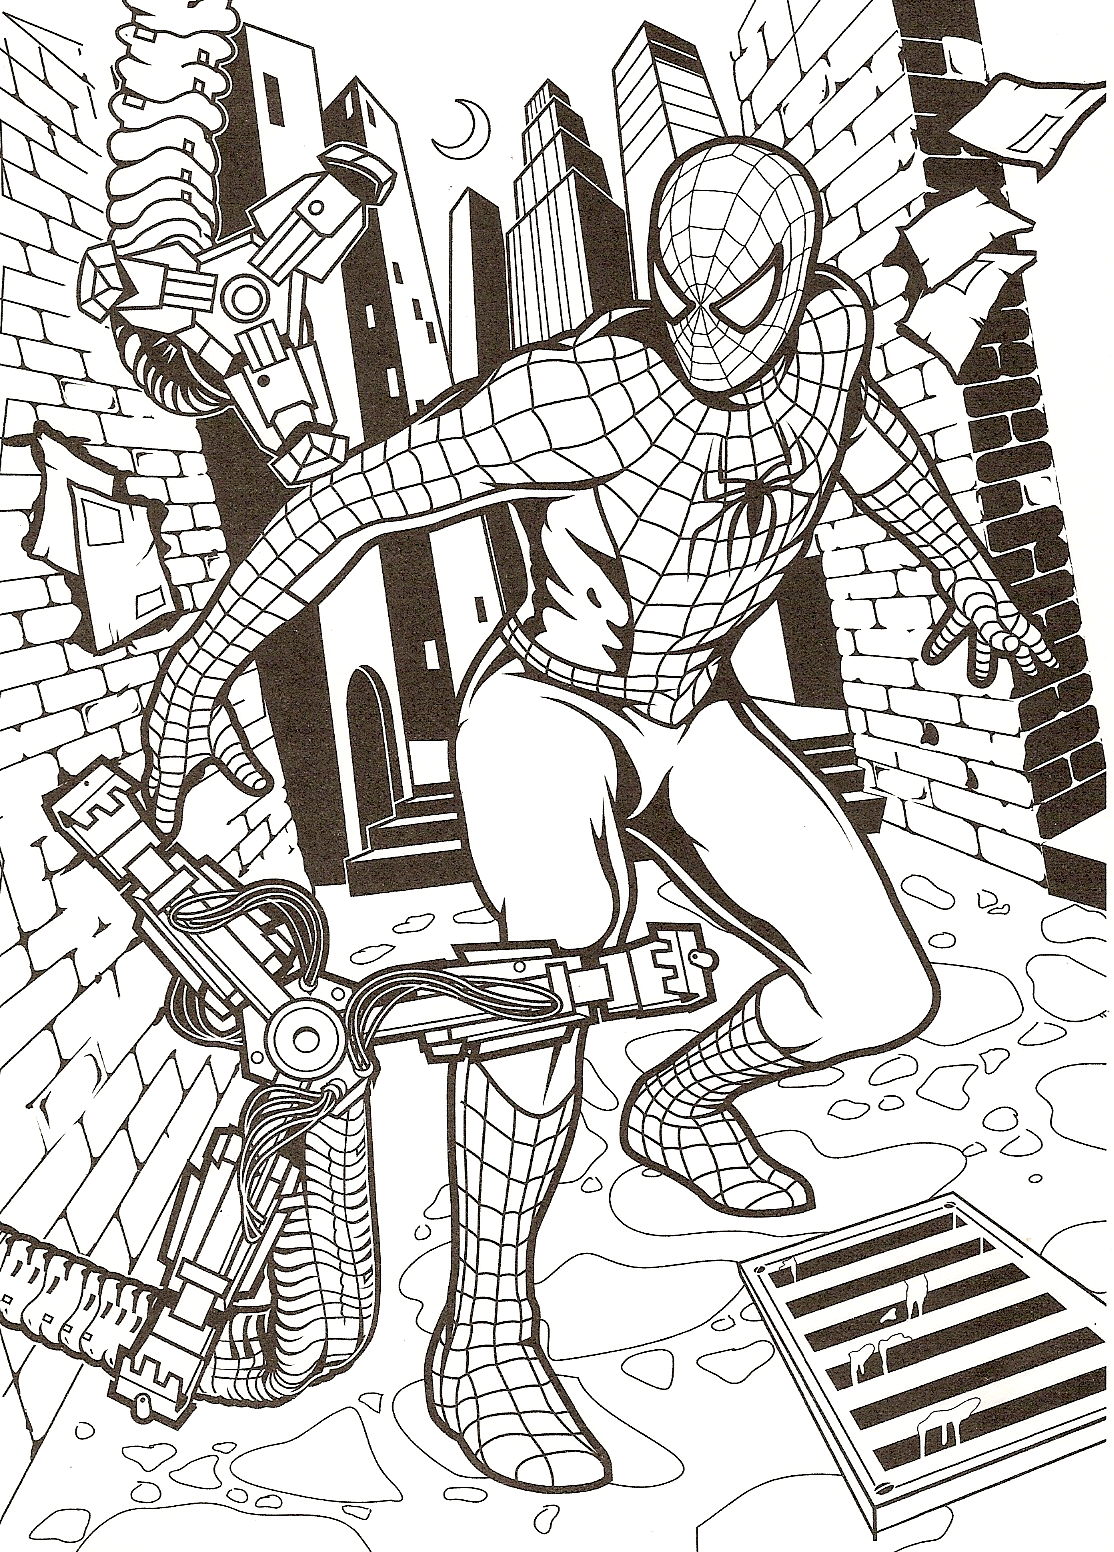 Spiderman in the street ready to give a beating to a bad guy!